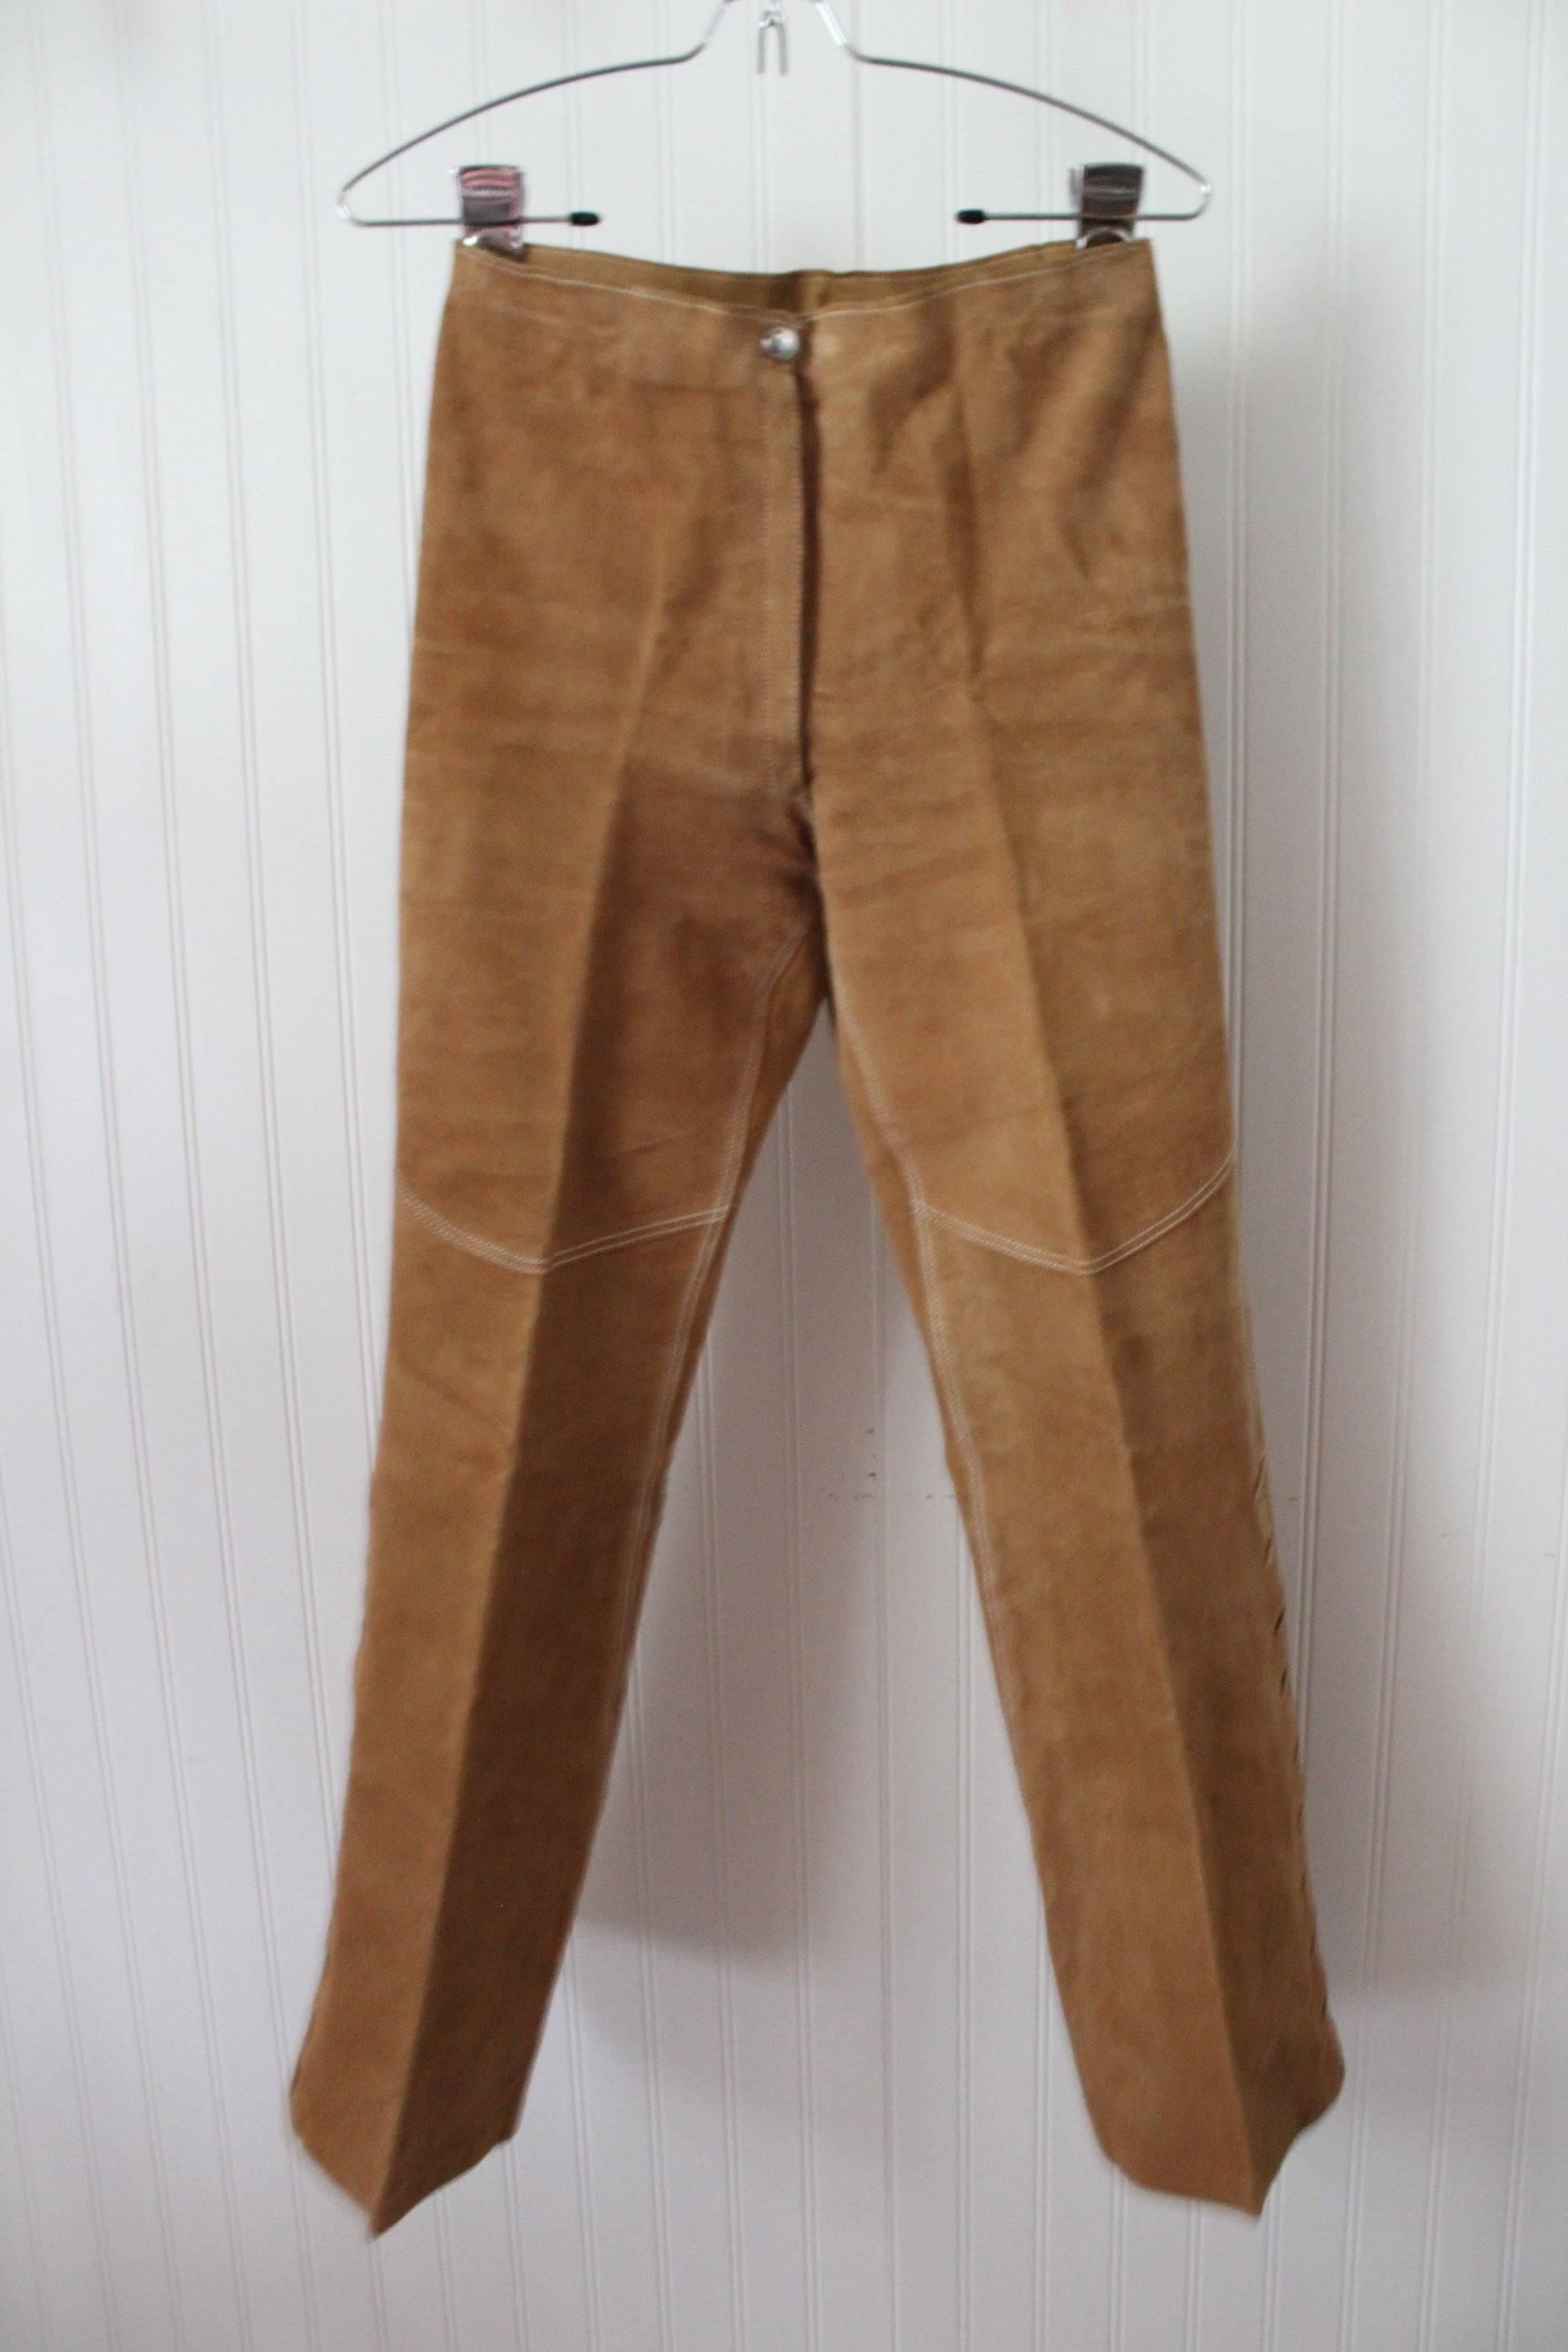 Vintage Leather Pants Laced Flare Leg Caramel Cream Top Stitch Great Detail retro